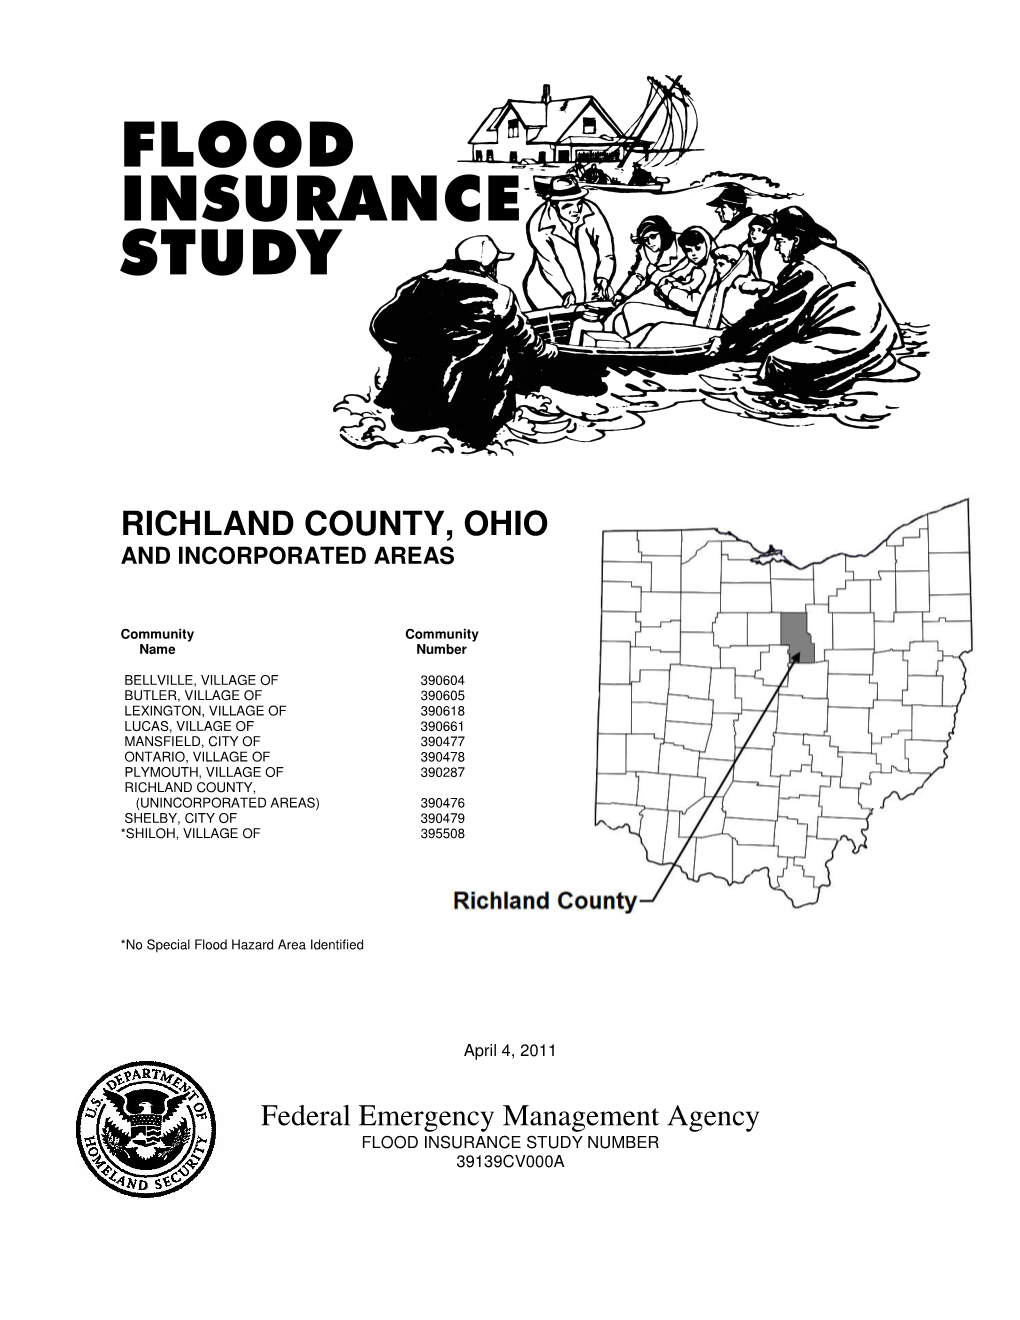 Richland County, Ohio and Incorporated Areas